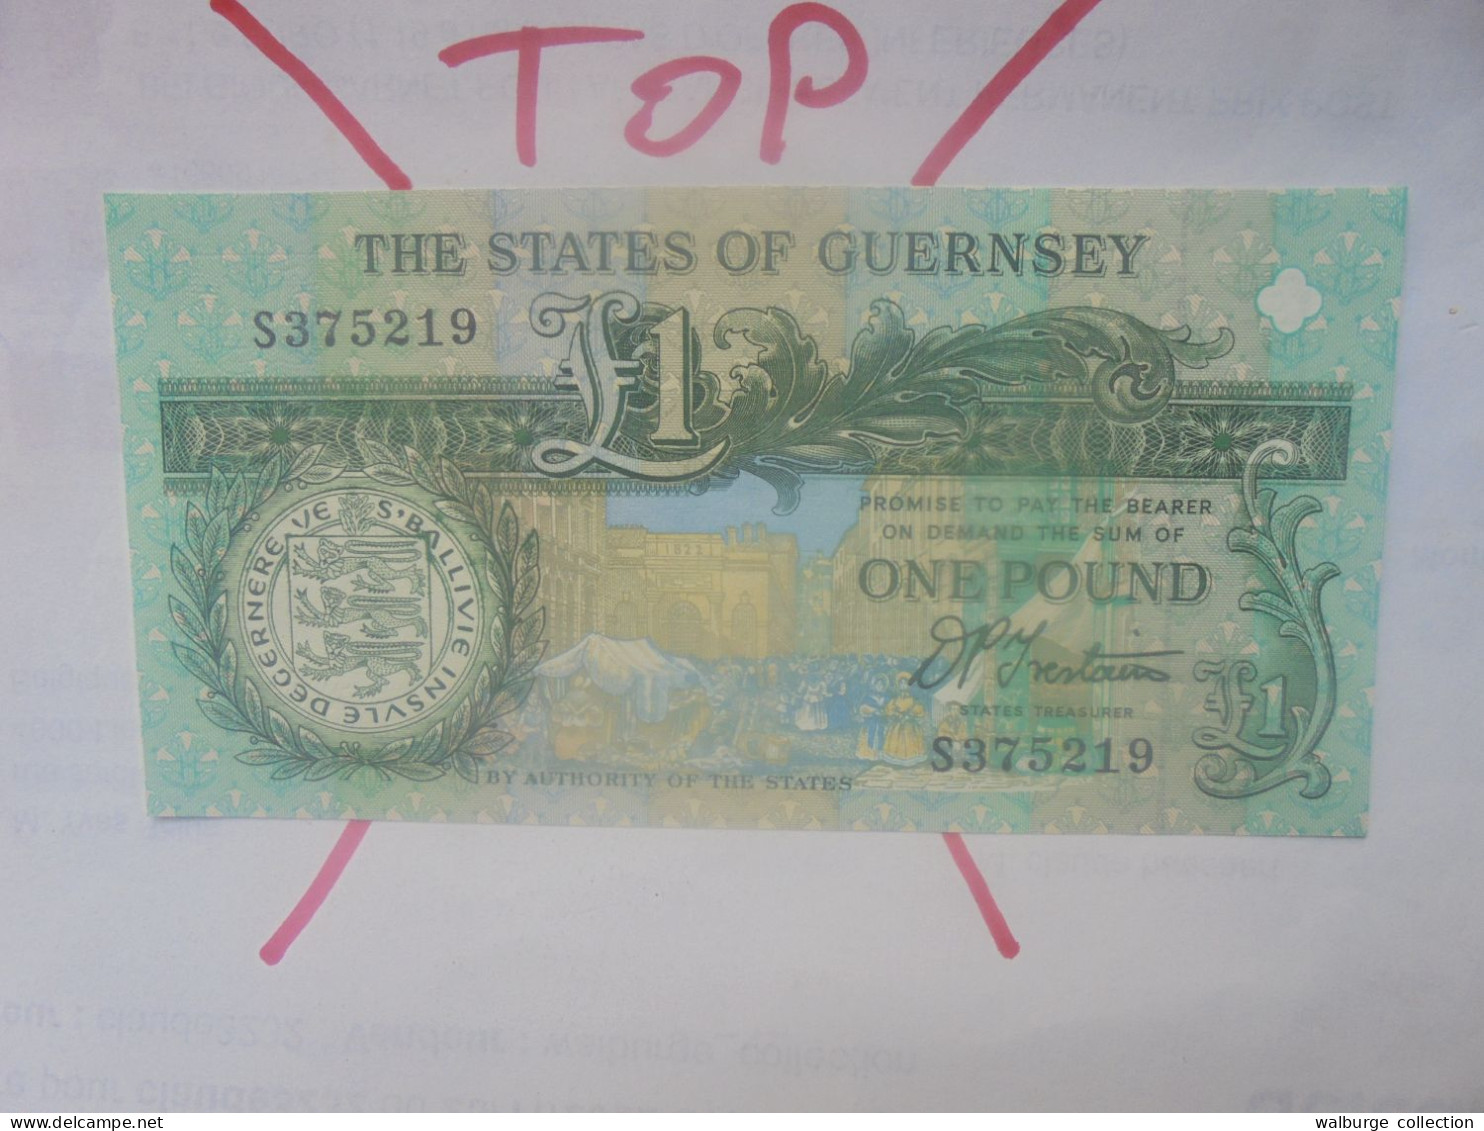 GUERNESEY 1 POUND 1991 Neuf (B.30) - Guernesey